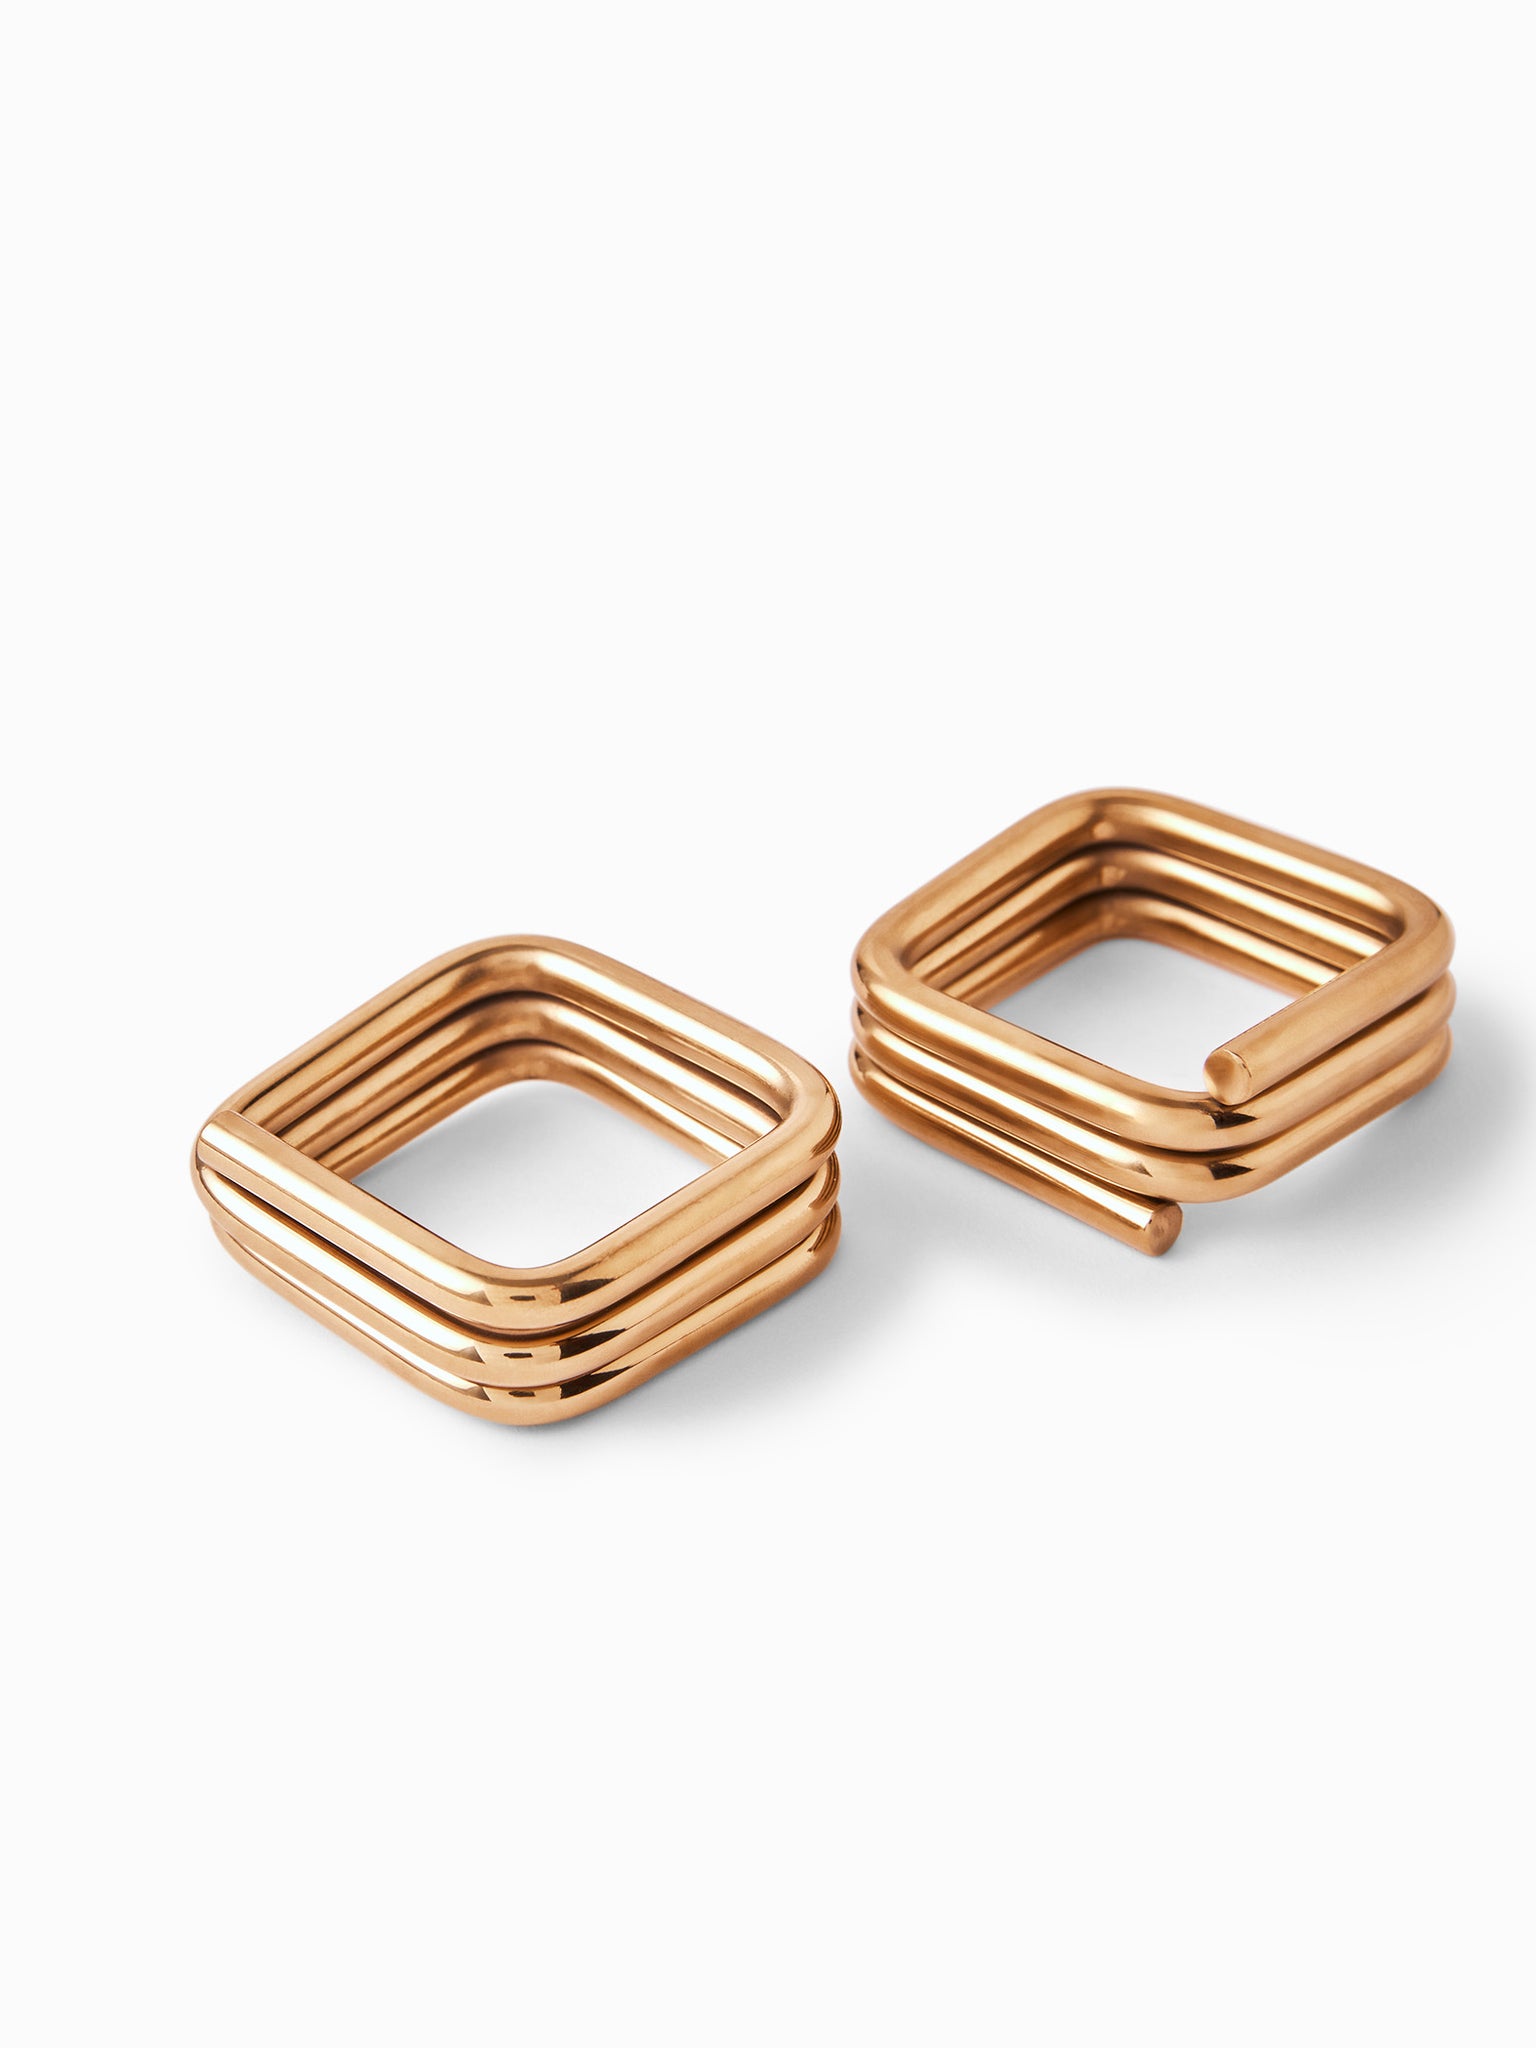 

Gold Coiled Napkin Ring Set